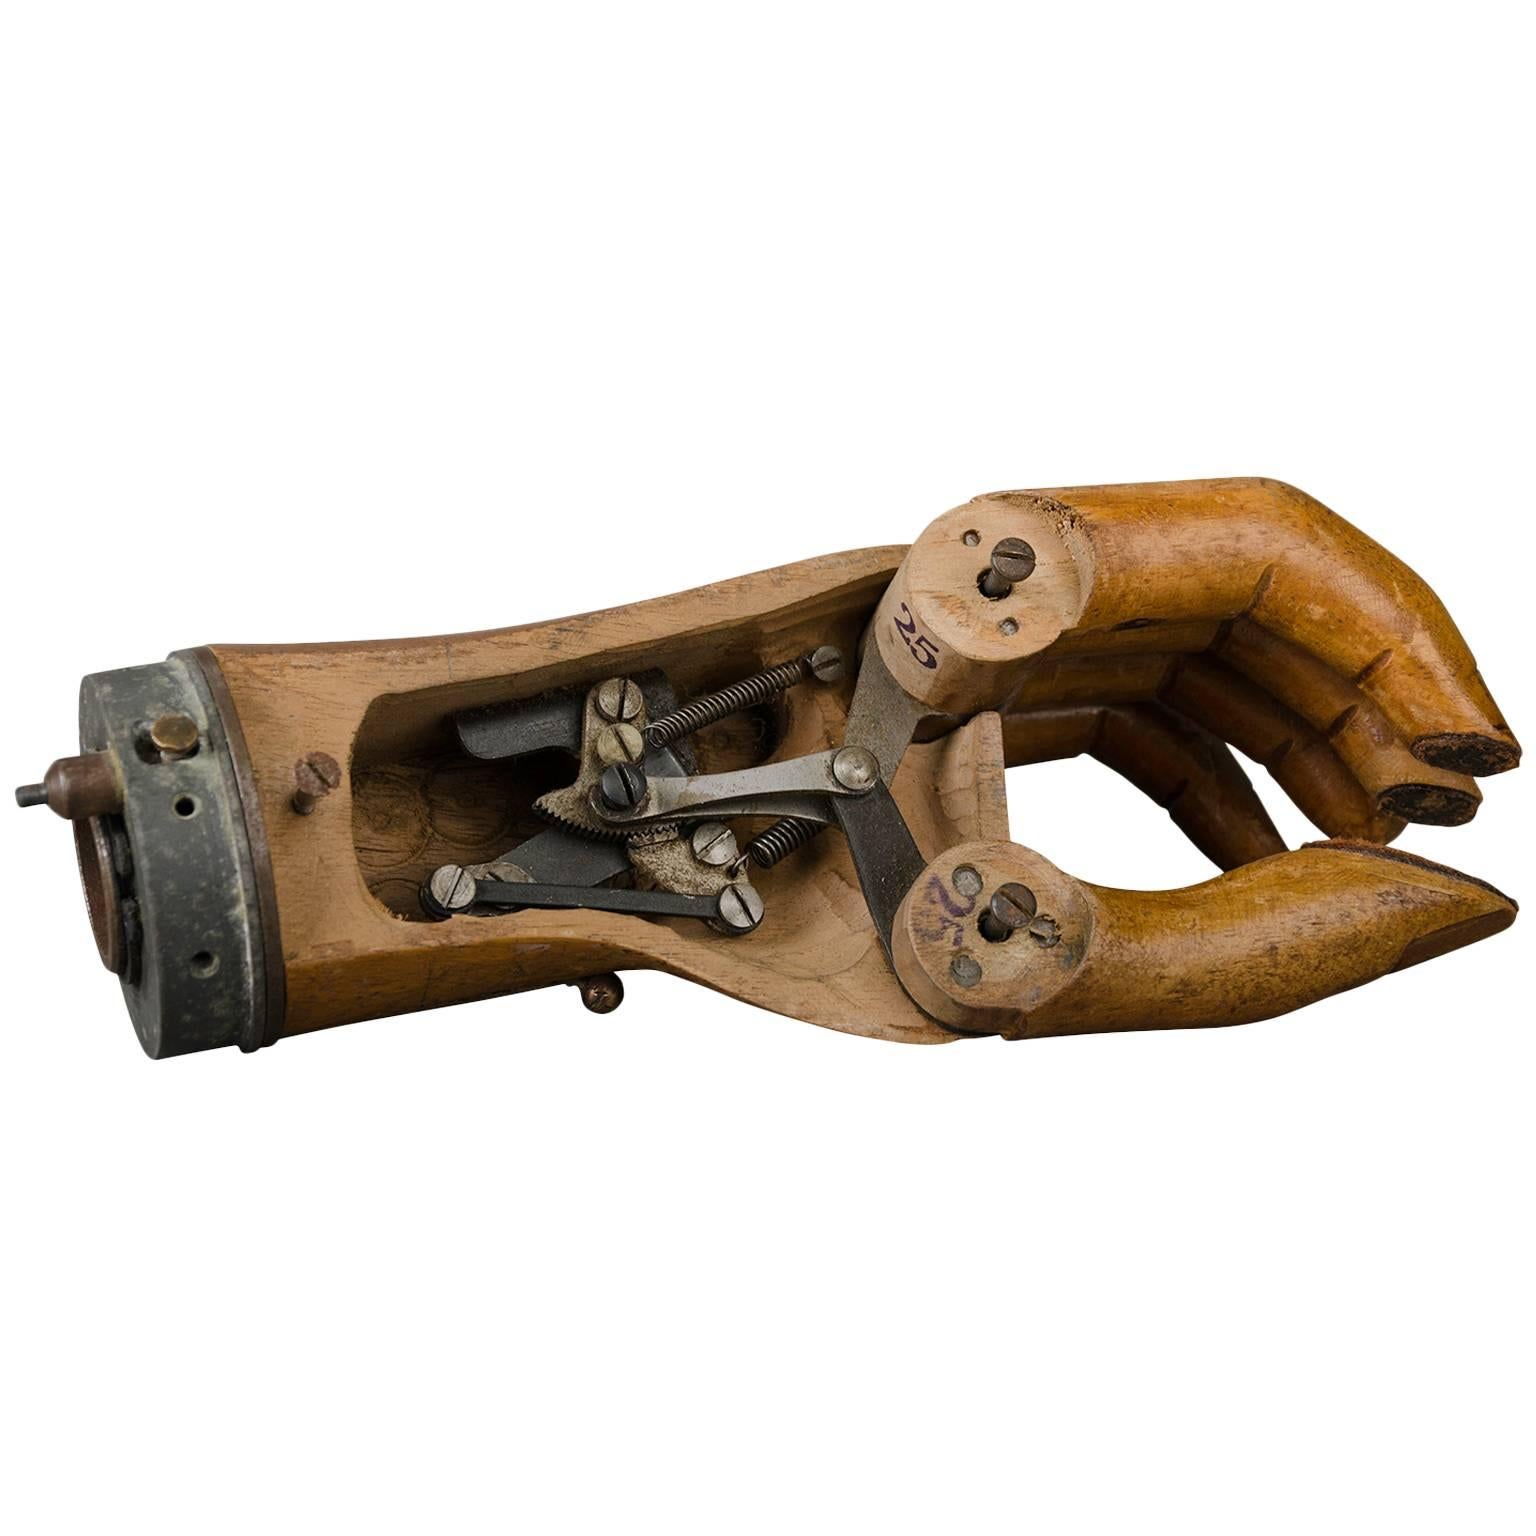 Hand Prosthesis with Mechanical Joint, circa1920